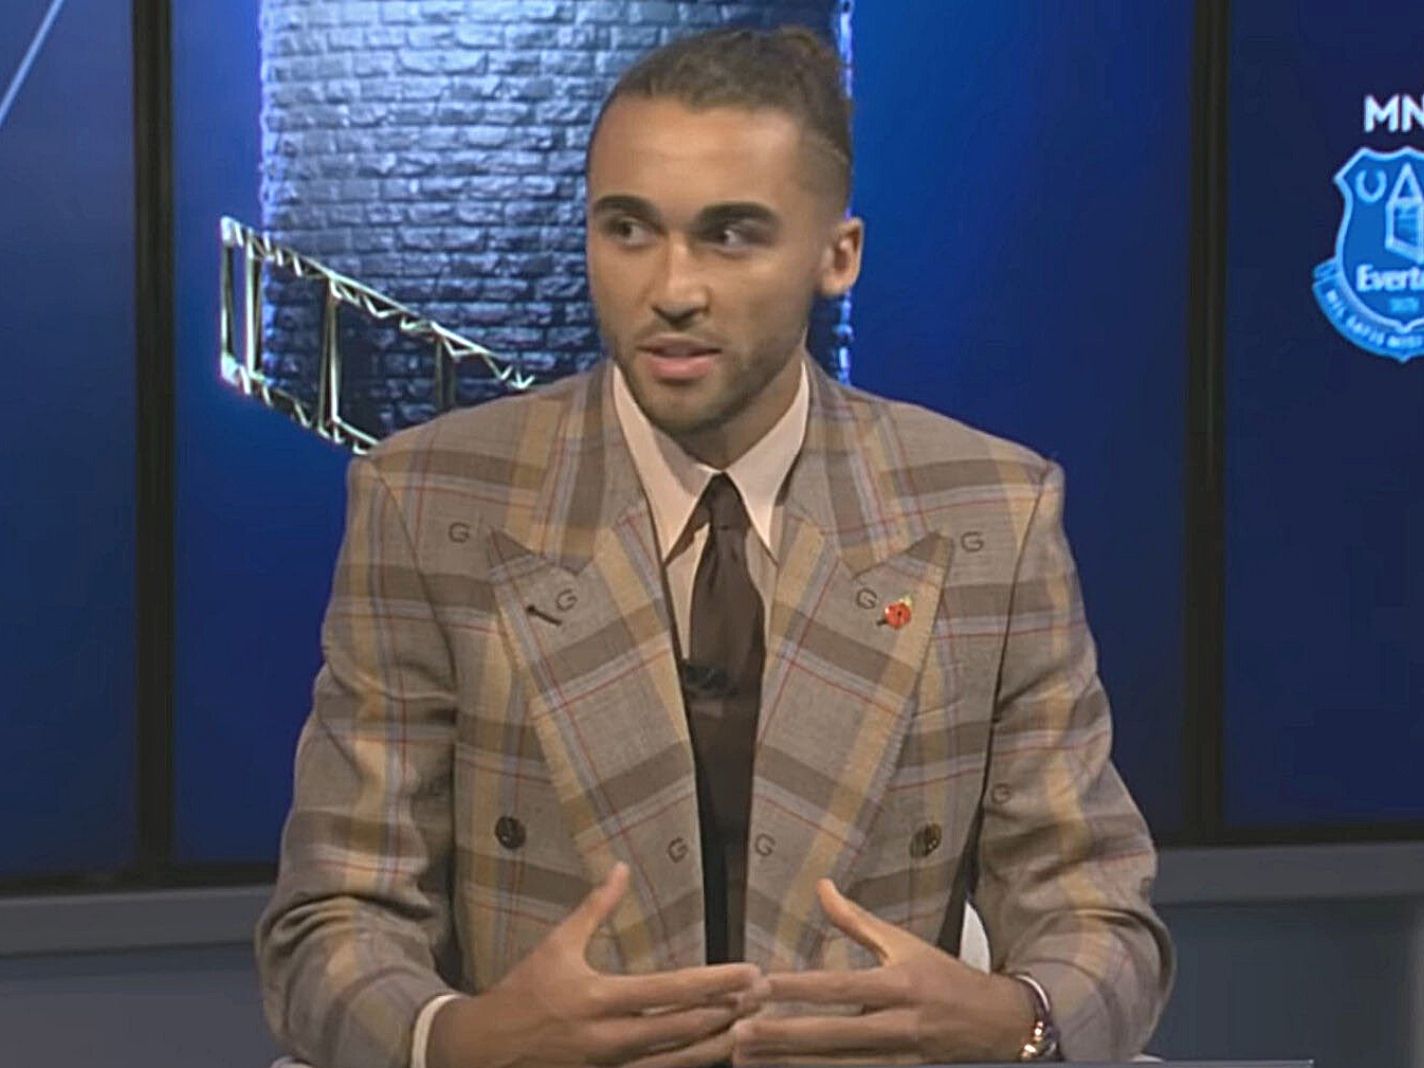 Dominic Calvert-Lewin divides opinions with 'grandad suit' during MNF appearance